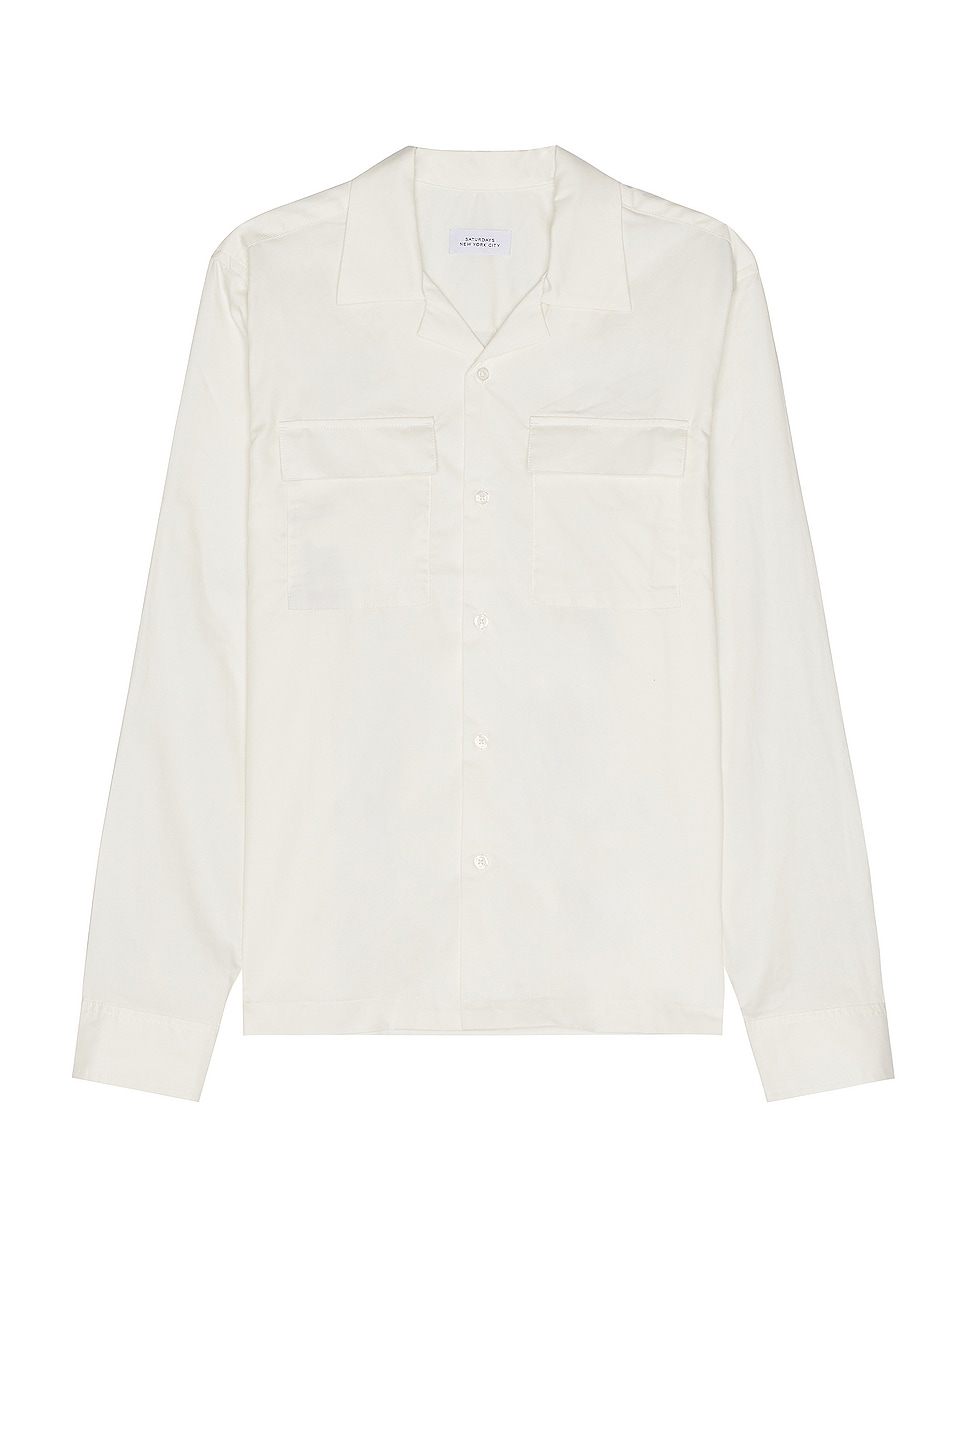 Image 1 of SATURDAYS NYC Marco Shirt in Ivory